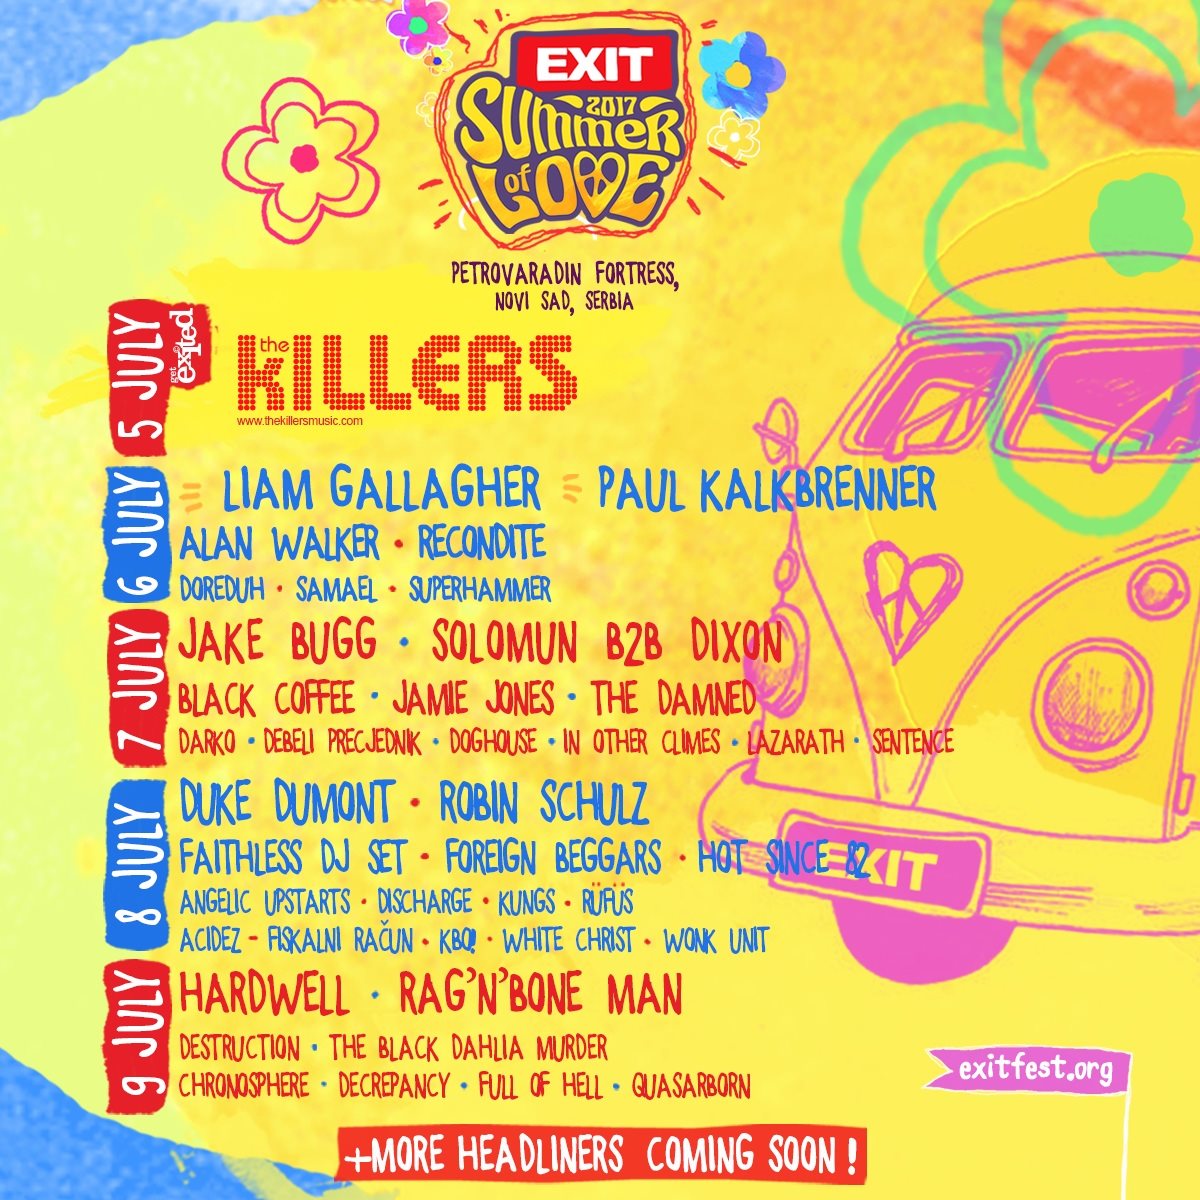 EXIT Summer of Love 2017